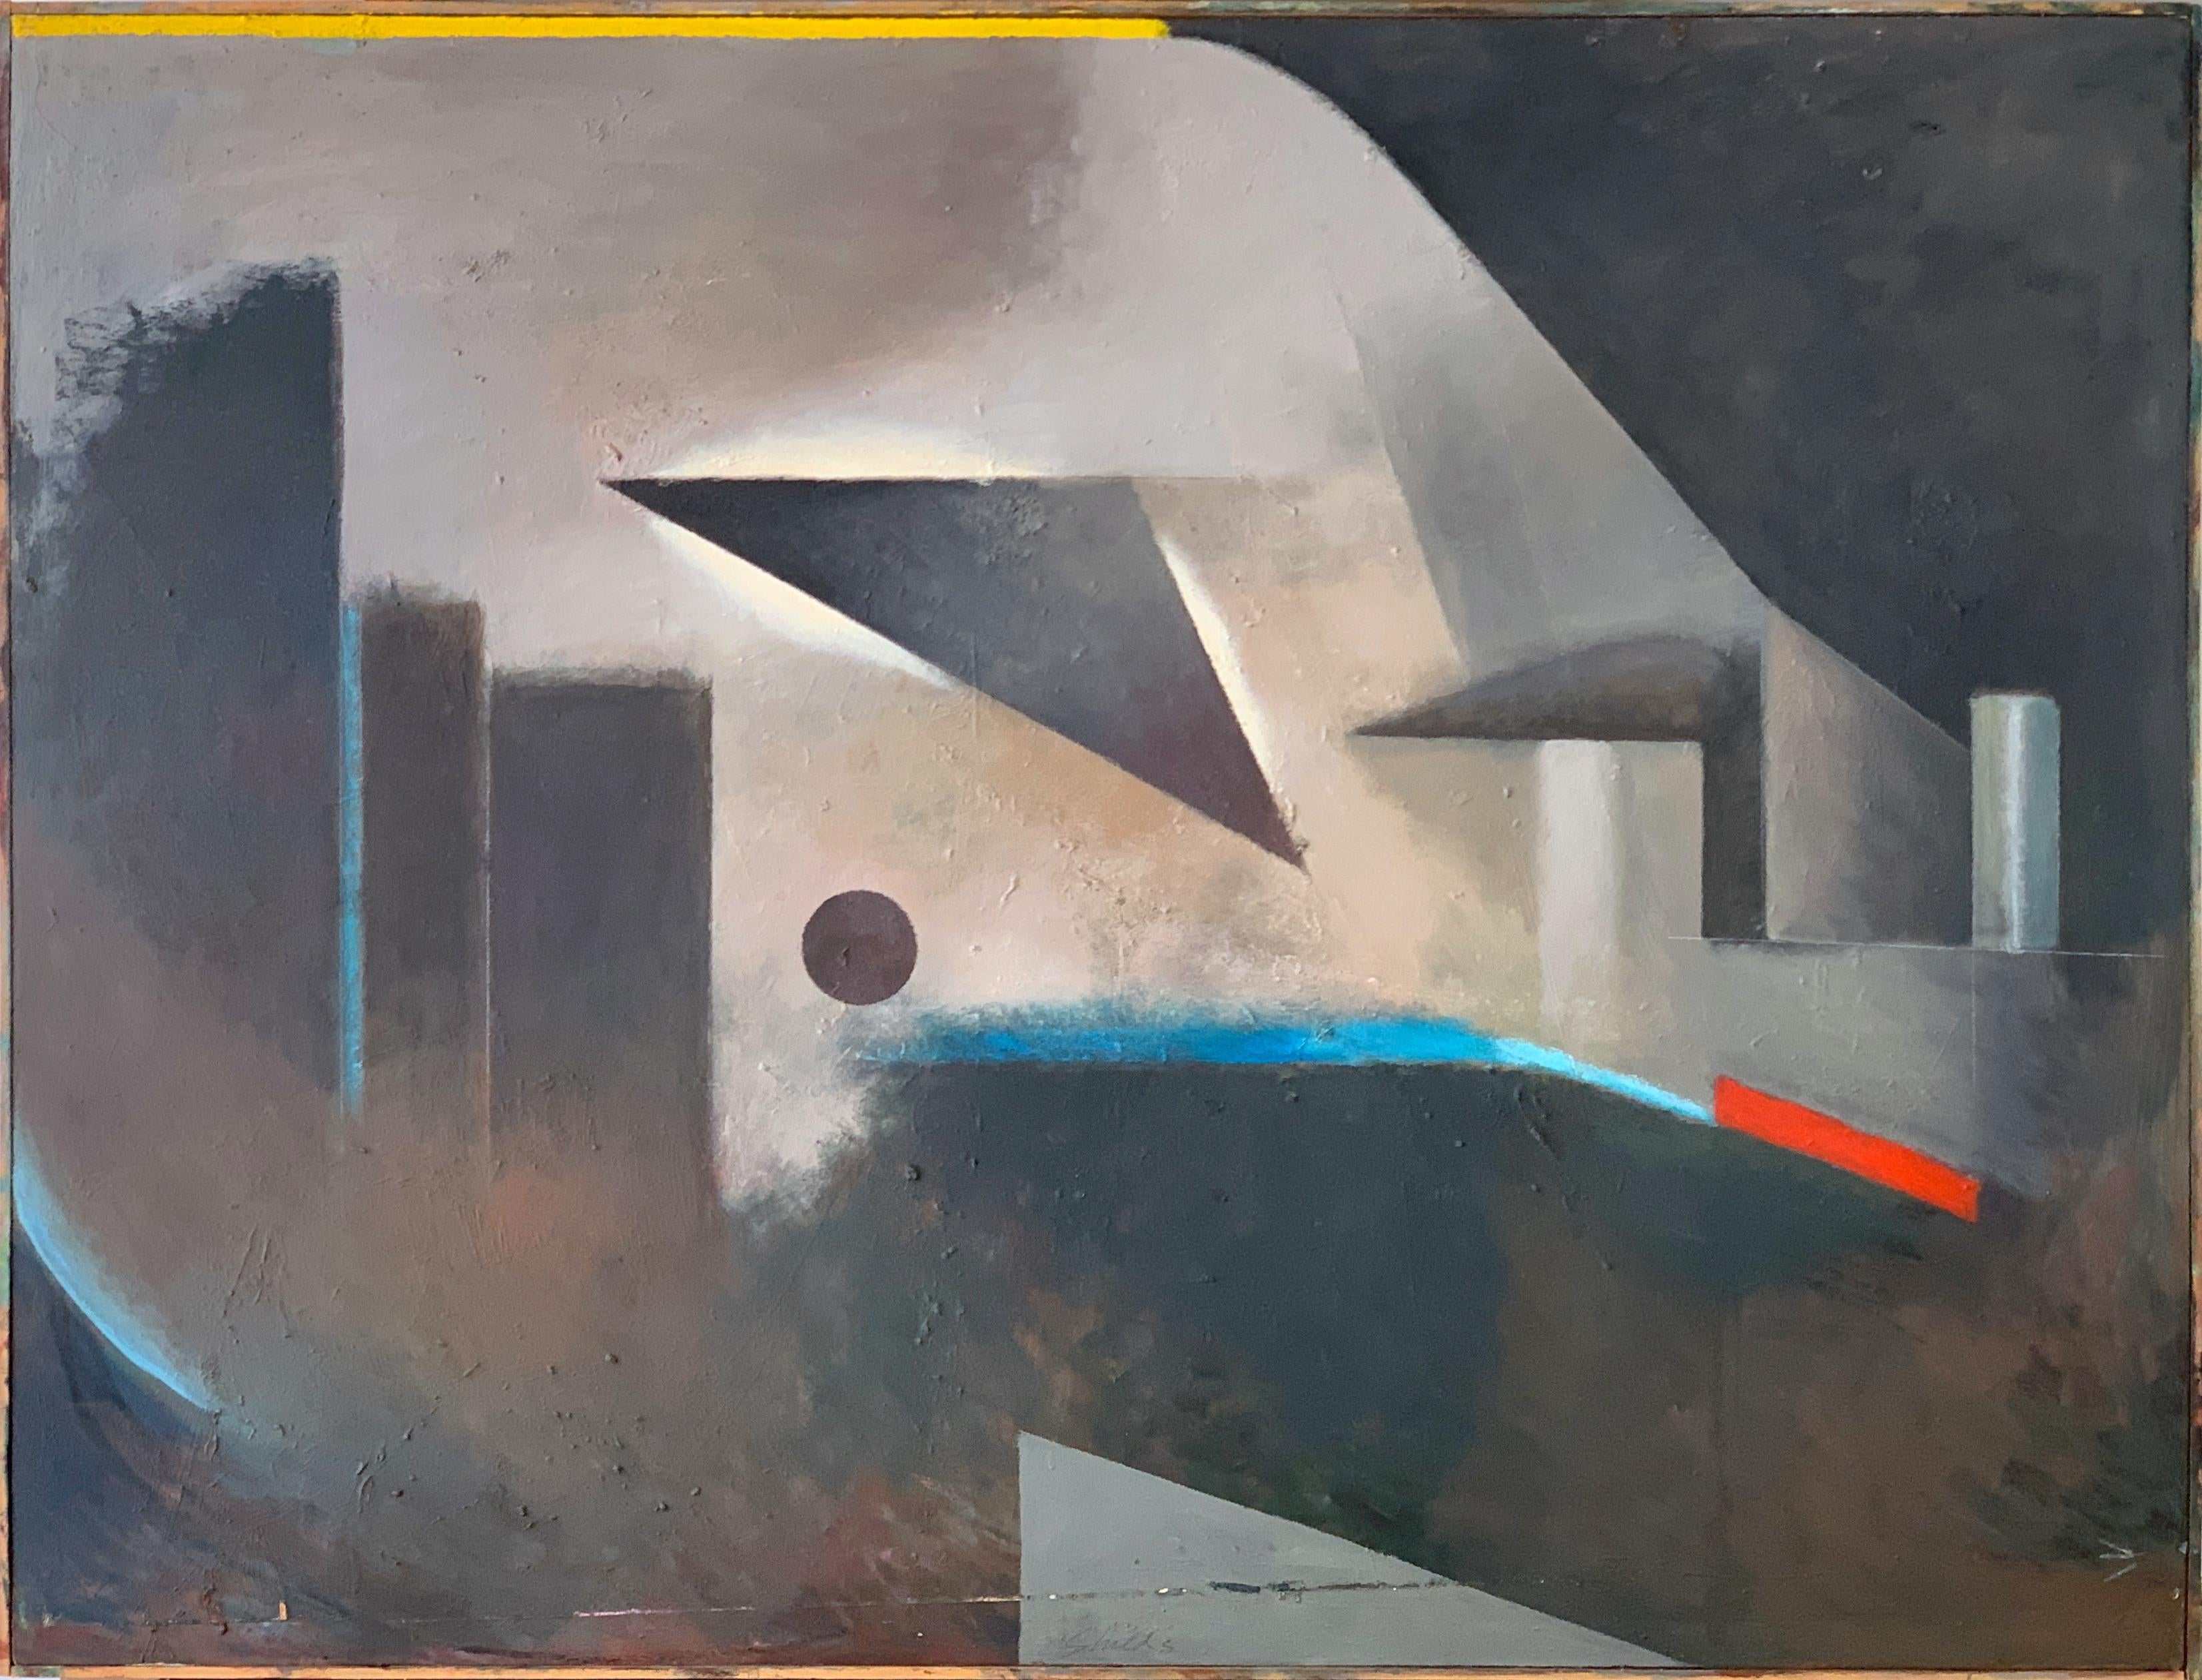 William Shields  Abstract Painting - 1996 "Early Sunday, II" Abstract Oil Painting on Canvas Illustrator Bill Shields